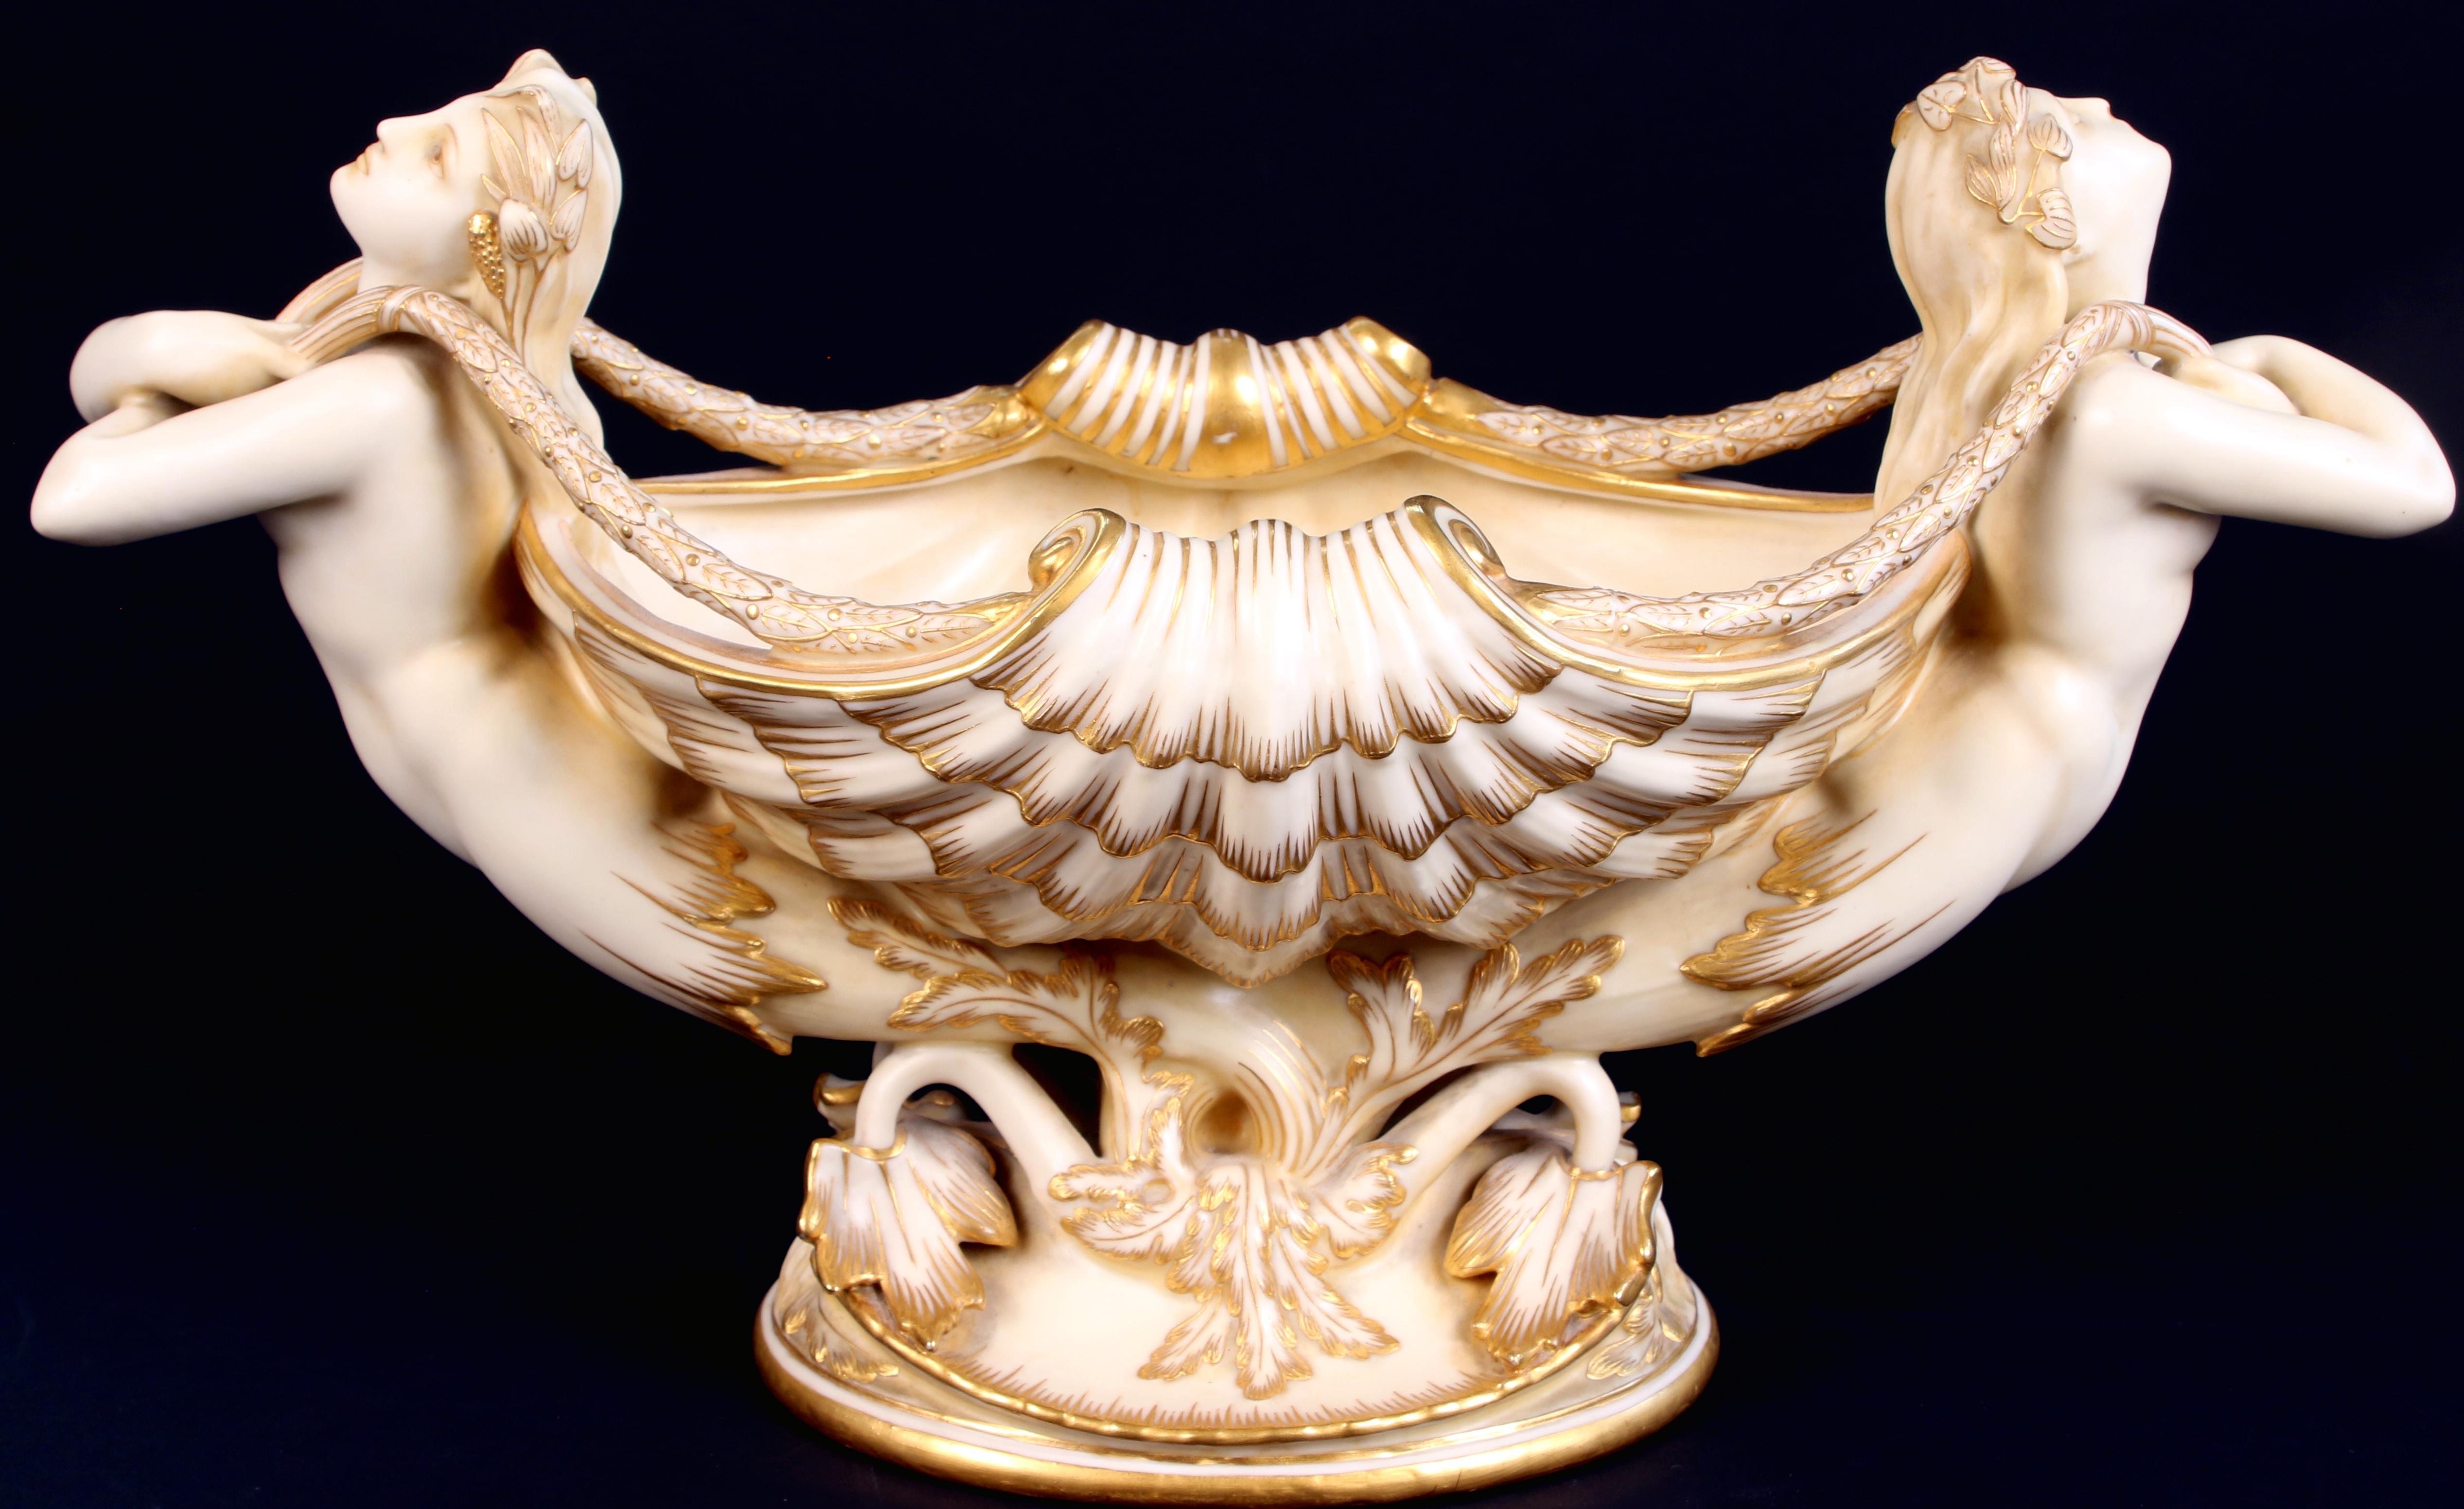 19th century Minton jardinere features a scallop shell supported by two elegant mermaids with lily-pod decorated hair that flows into the bowl. Made of parian, Minton's version of statuary porcelain, that Minton developed in 1846. The mermaids